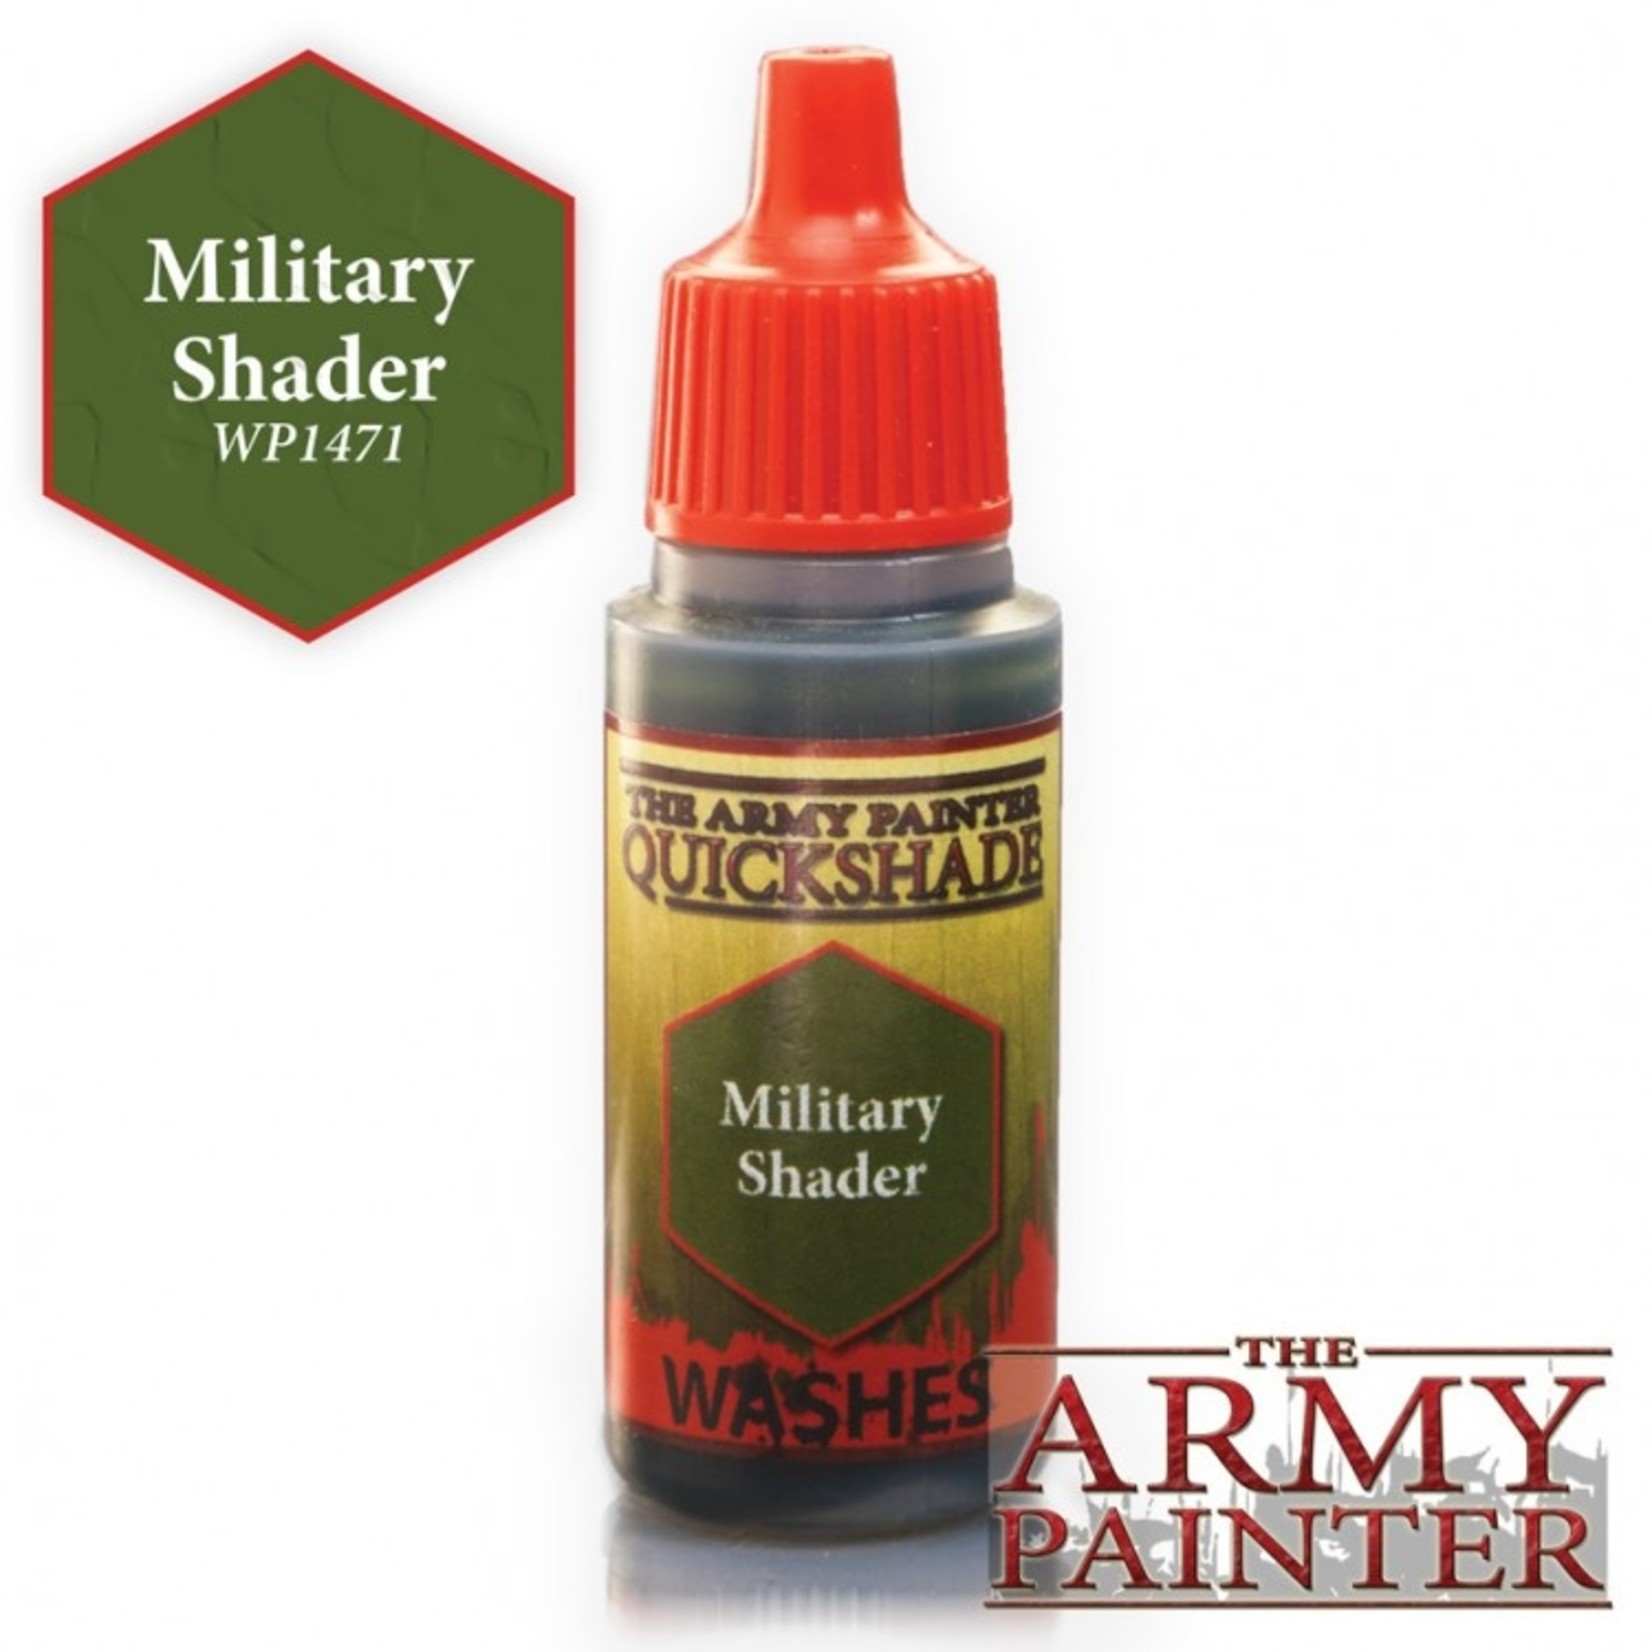 The Army Painter The Army Painter Military Shader 18ml